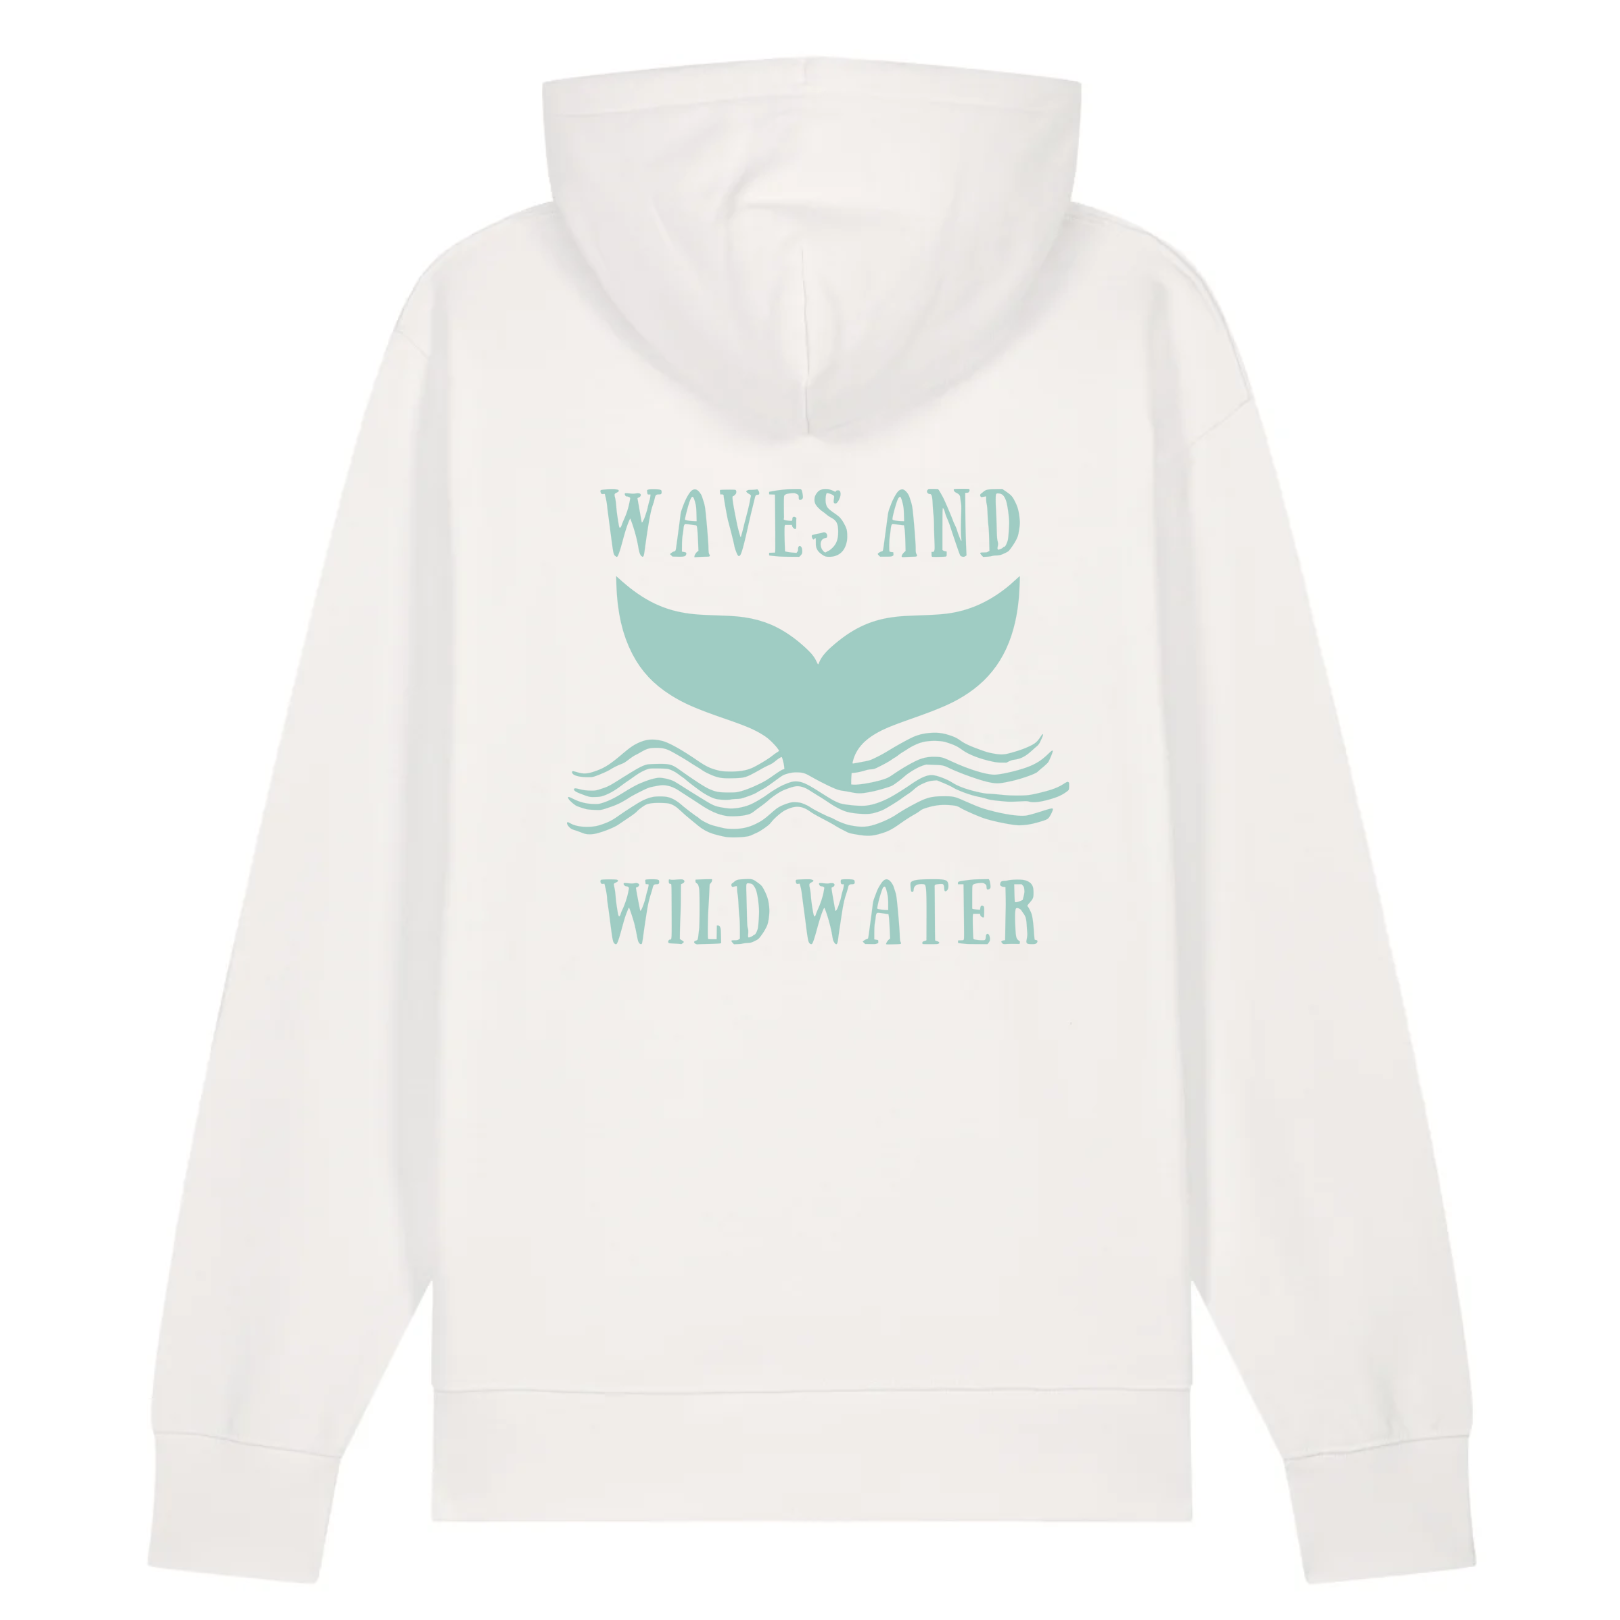 Introducing our natural coloured Beach Hut Hoodie with Waves and Wild Water logo on the back in teal chemical free ink. We just love wearing ours after a cold water dip.